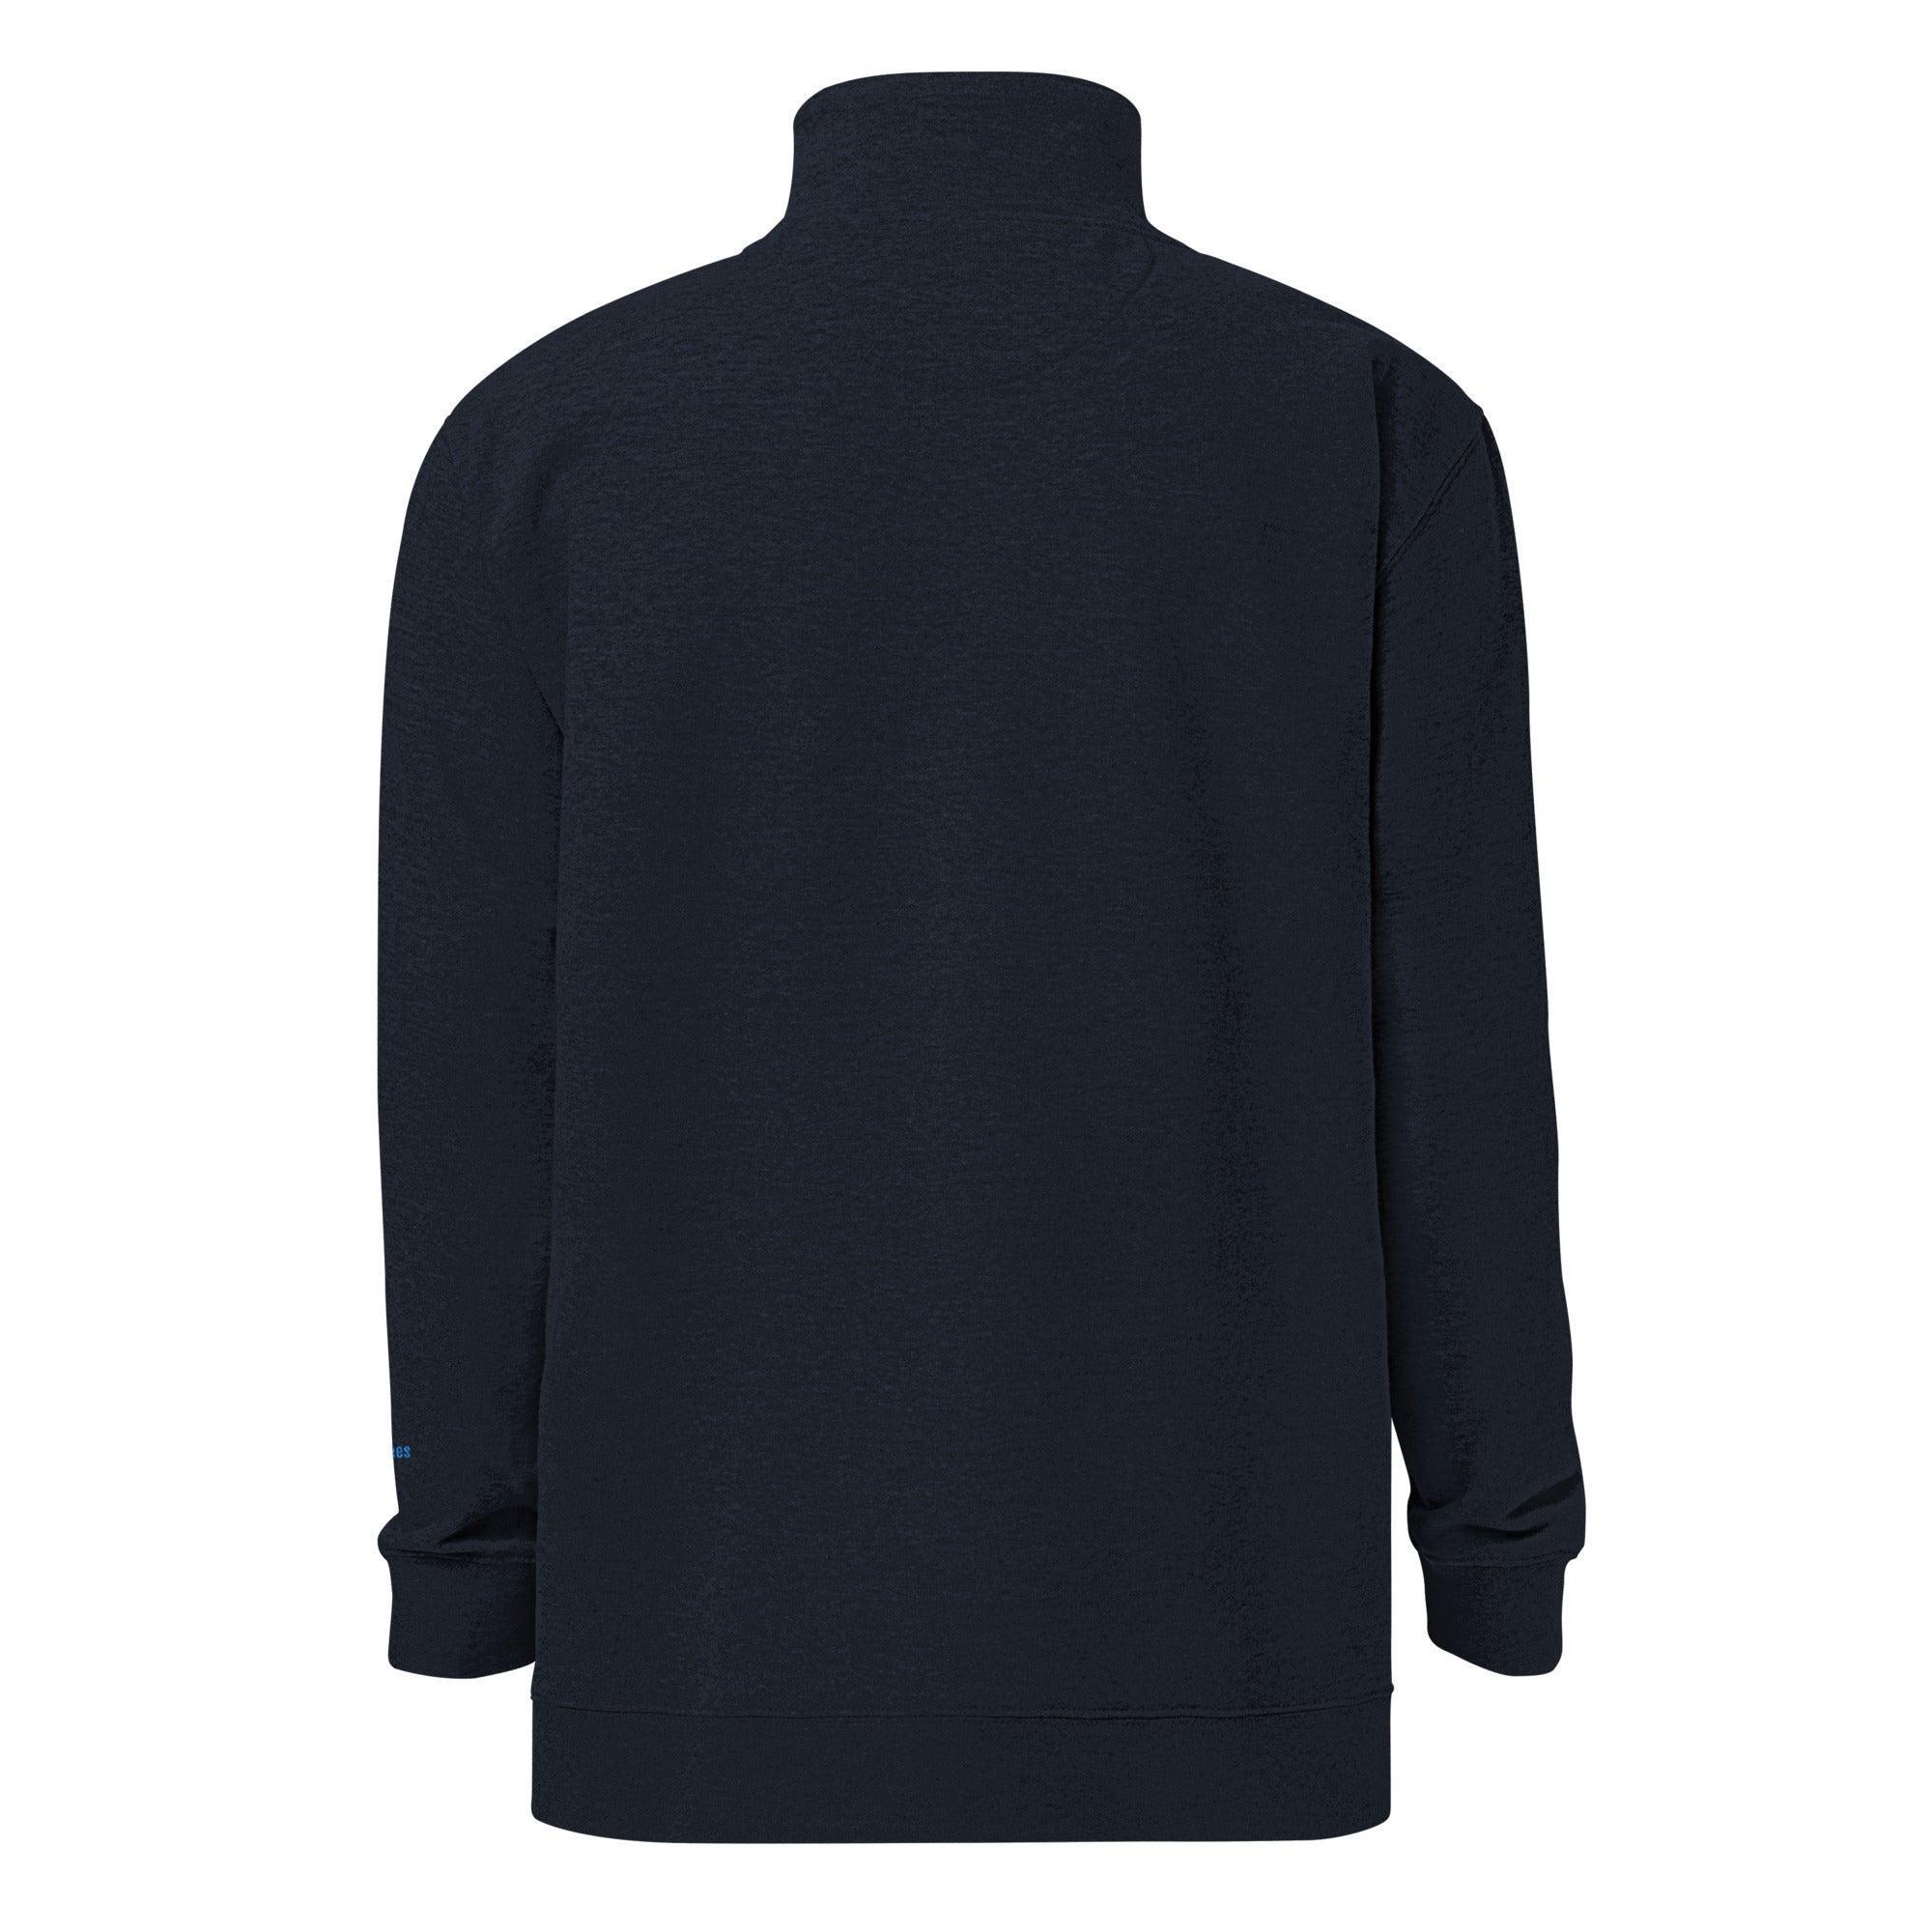 Real Estate Agent Fleece Pullover - InvestmenTees